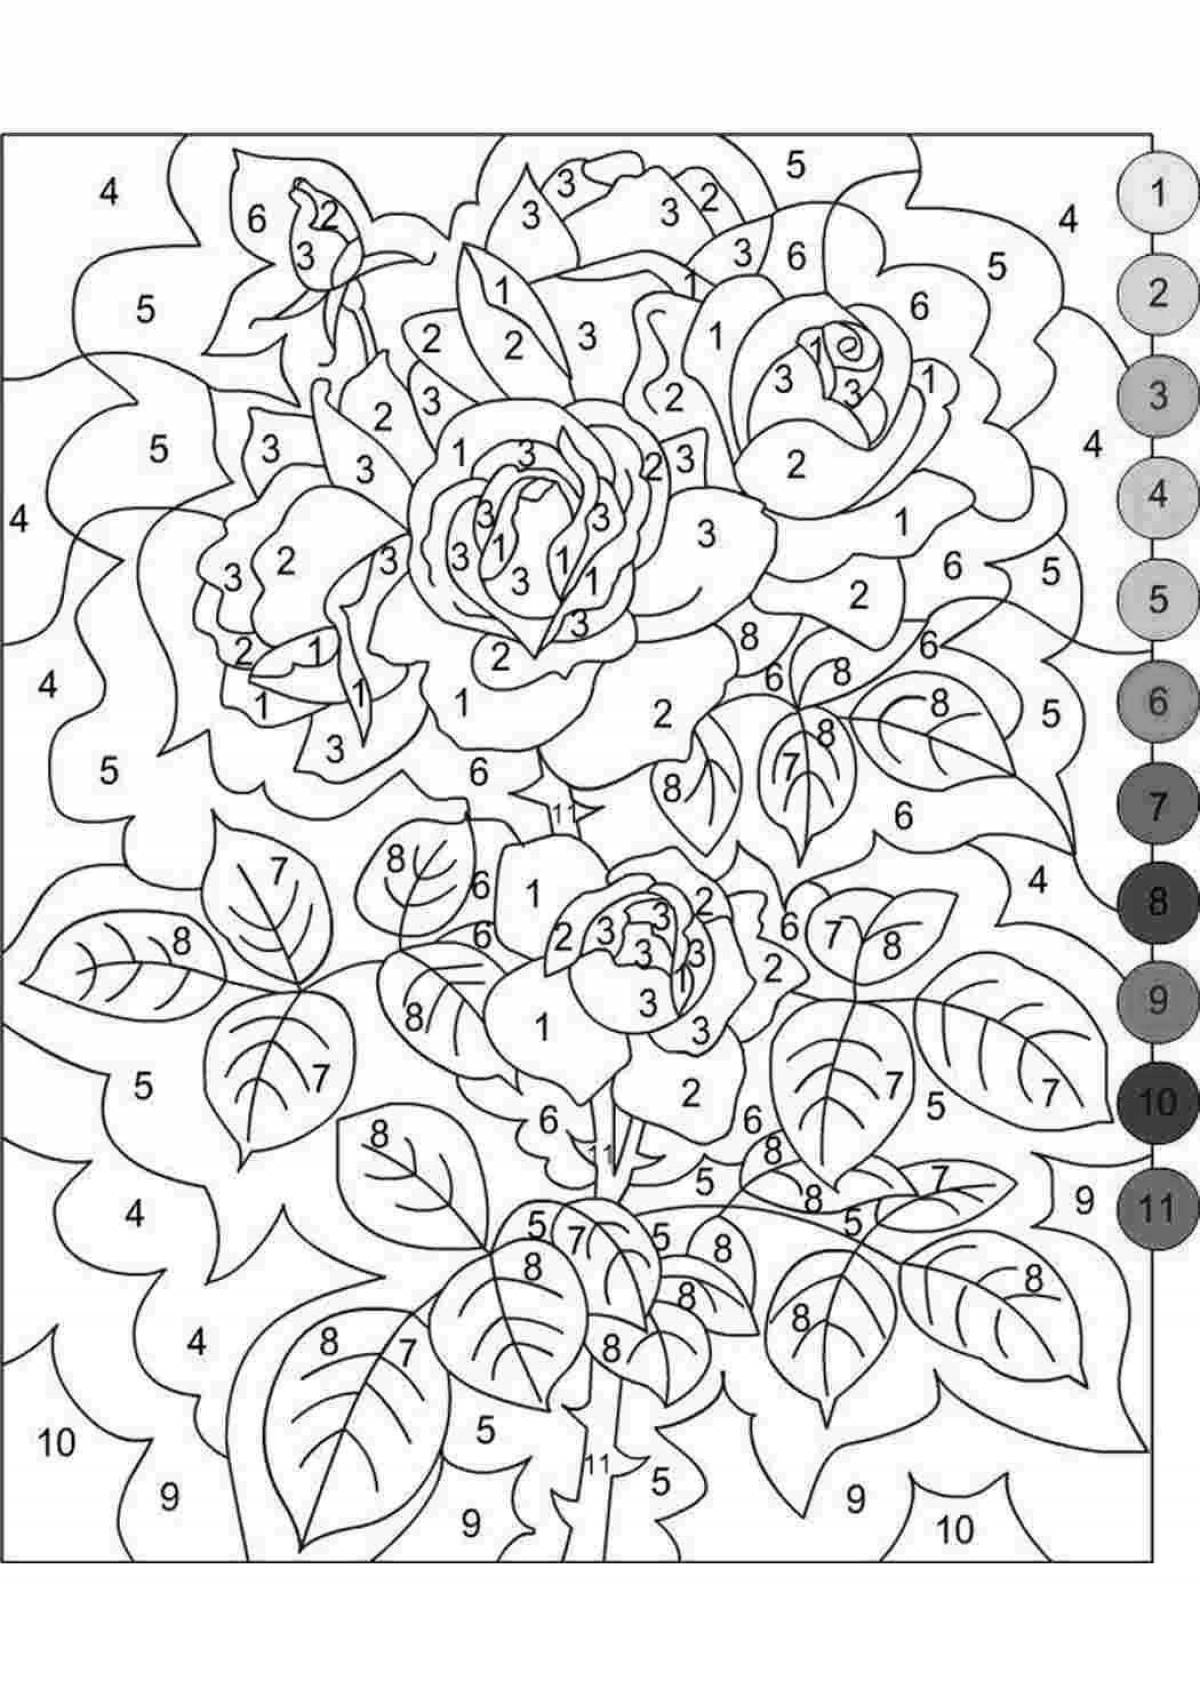 Detailed coloring by numbers on the phone